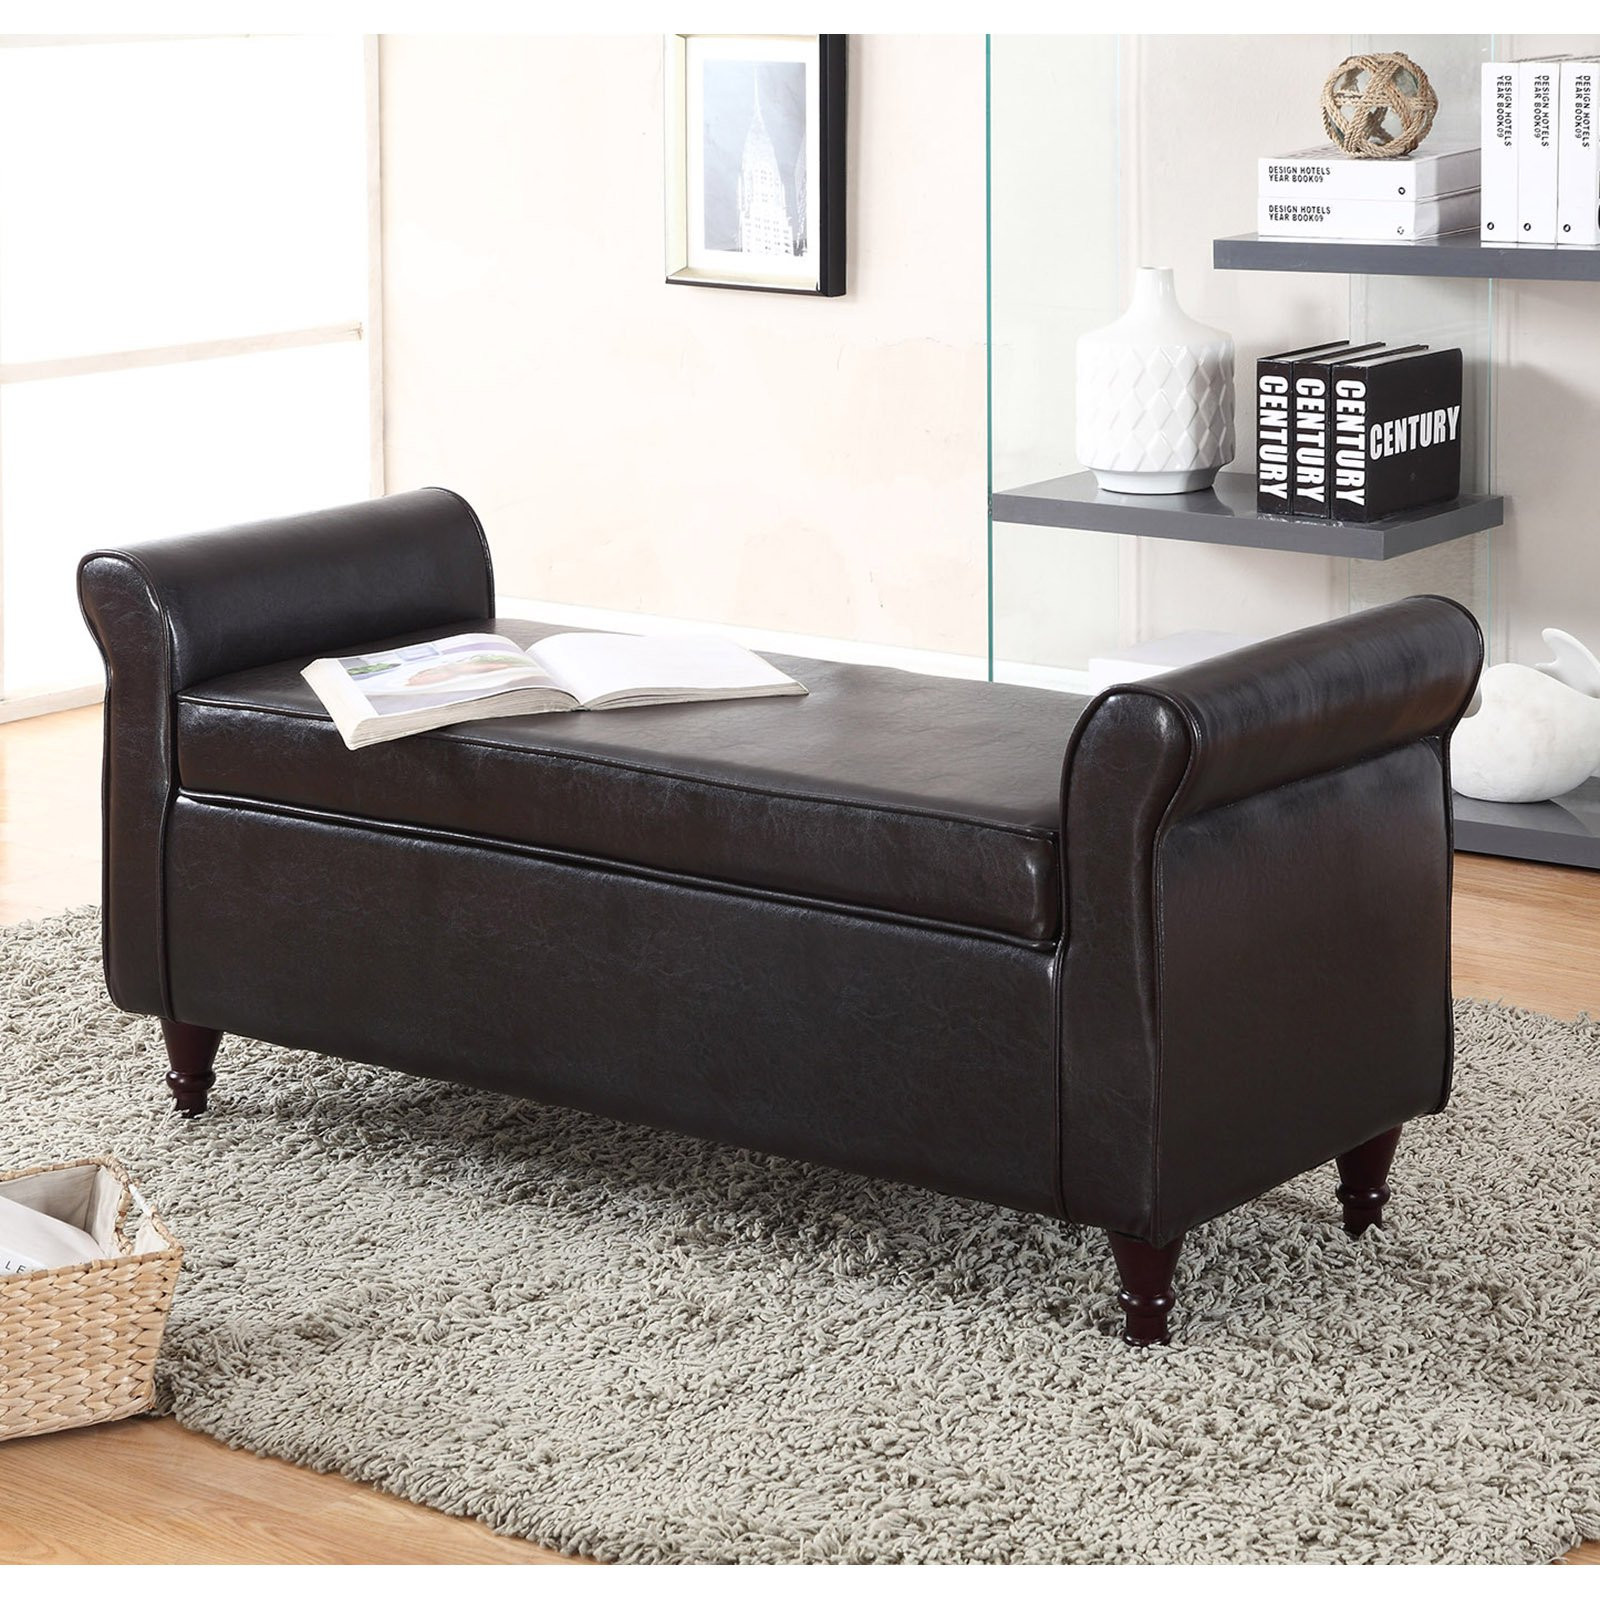 Leather Bench With Storage
 Milton Greens Stars Kassel Bonded Leather Indoor Storage